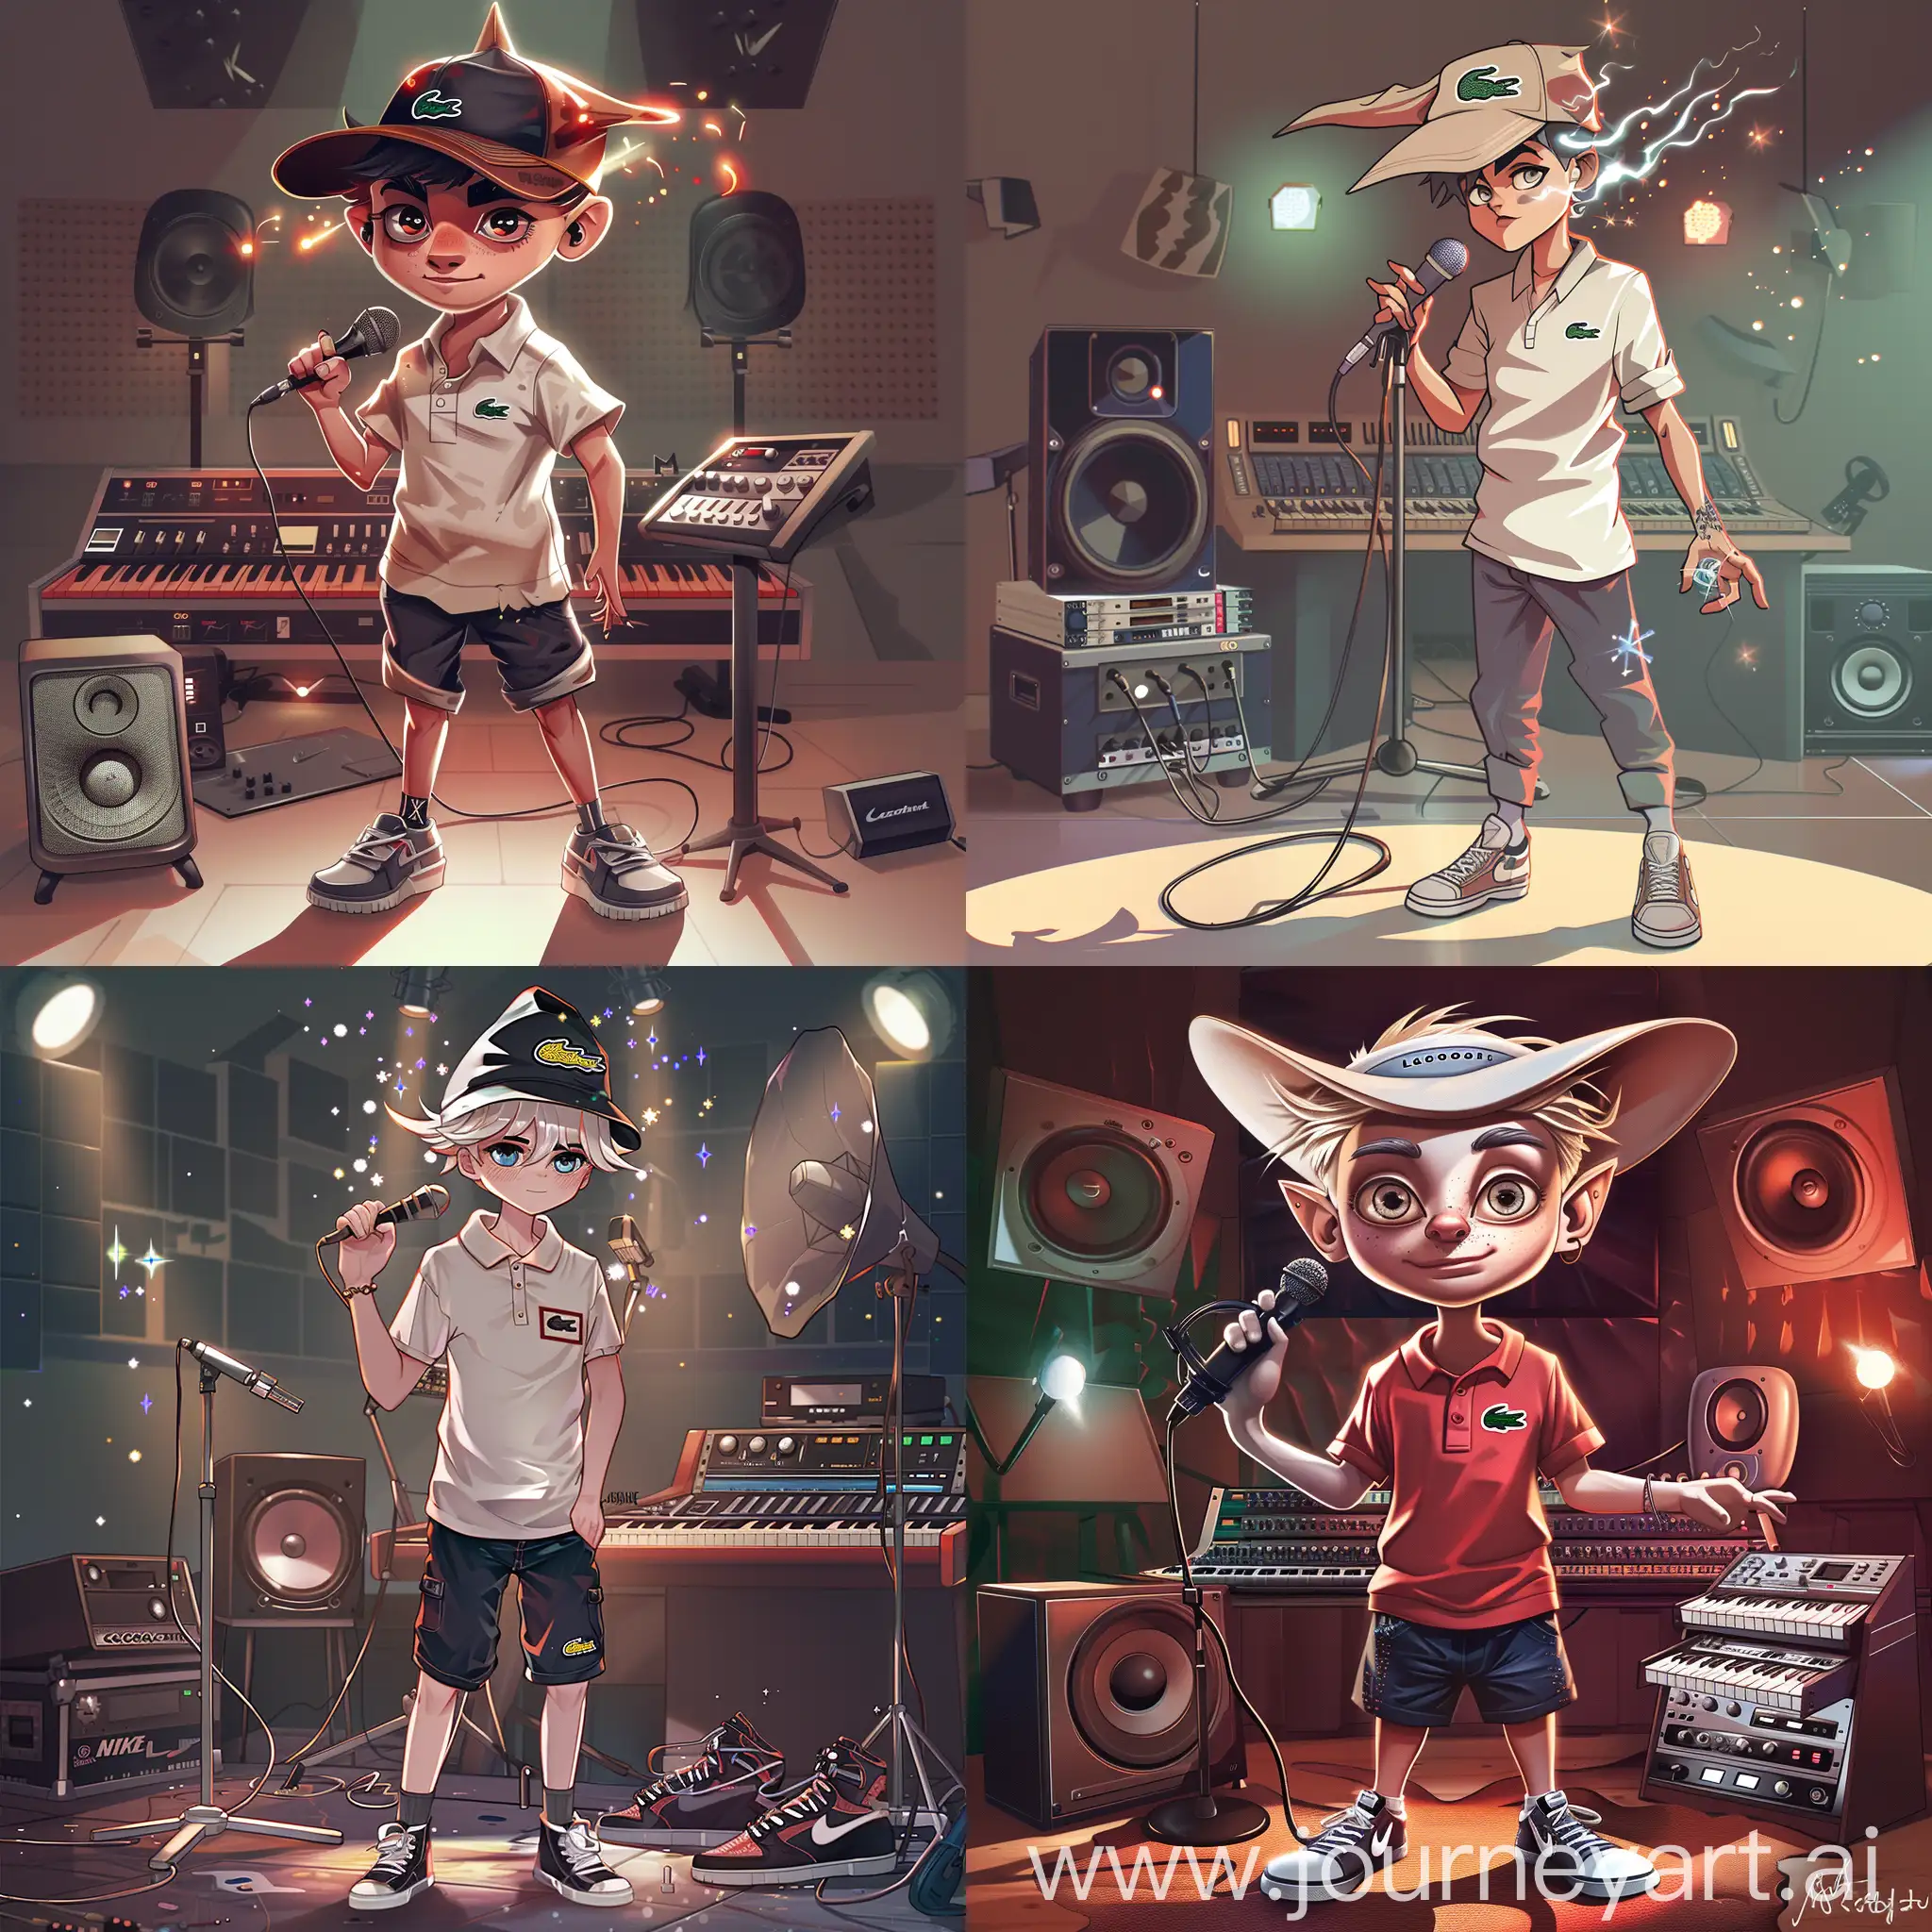 Young-White-Magician-in-Lacoste-Shirt-and-Nike-Sneakers-Performing-in-Music-Studio